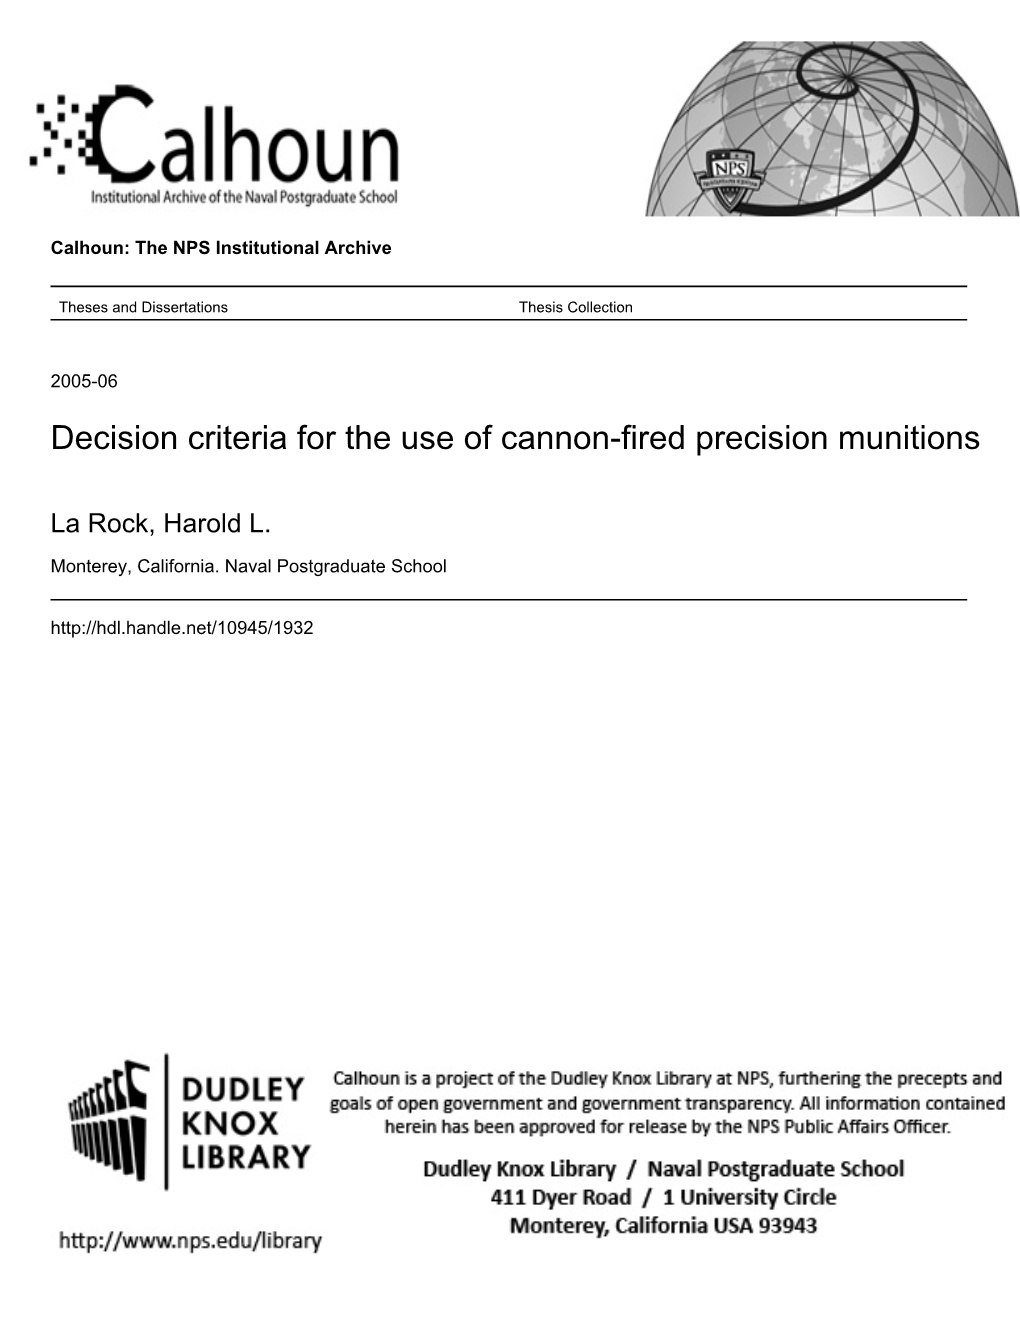 Decision Criteria for the Use of Cannon-Fired Precision Munitions